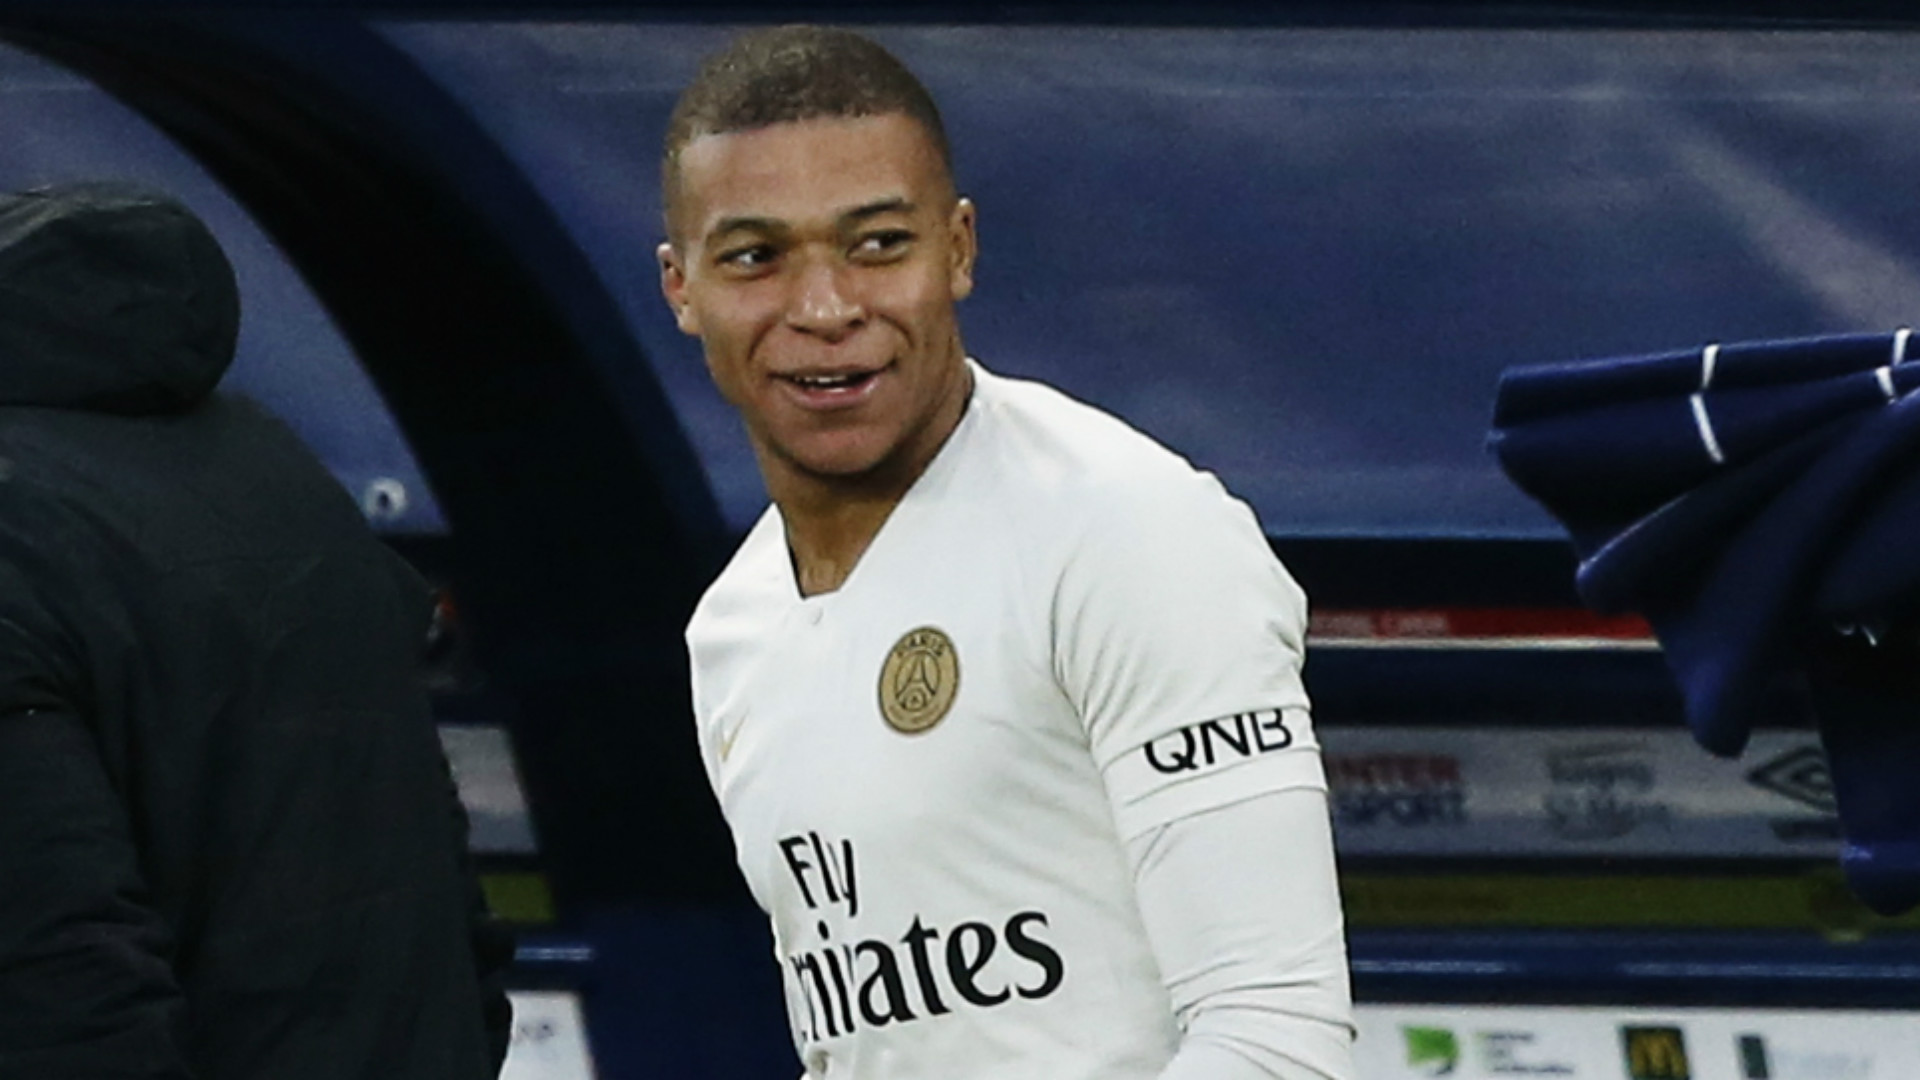 Transfer news and rumours LIVE: Real Madrid eye Mbappe as Bale replacement | Goal.com1920 x 1080